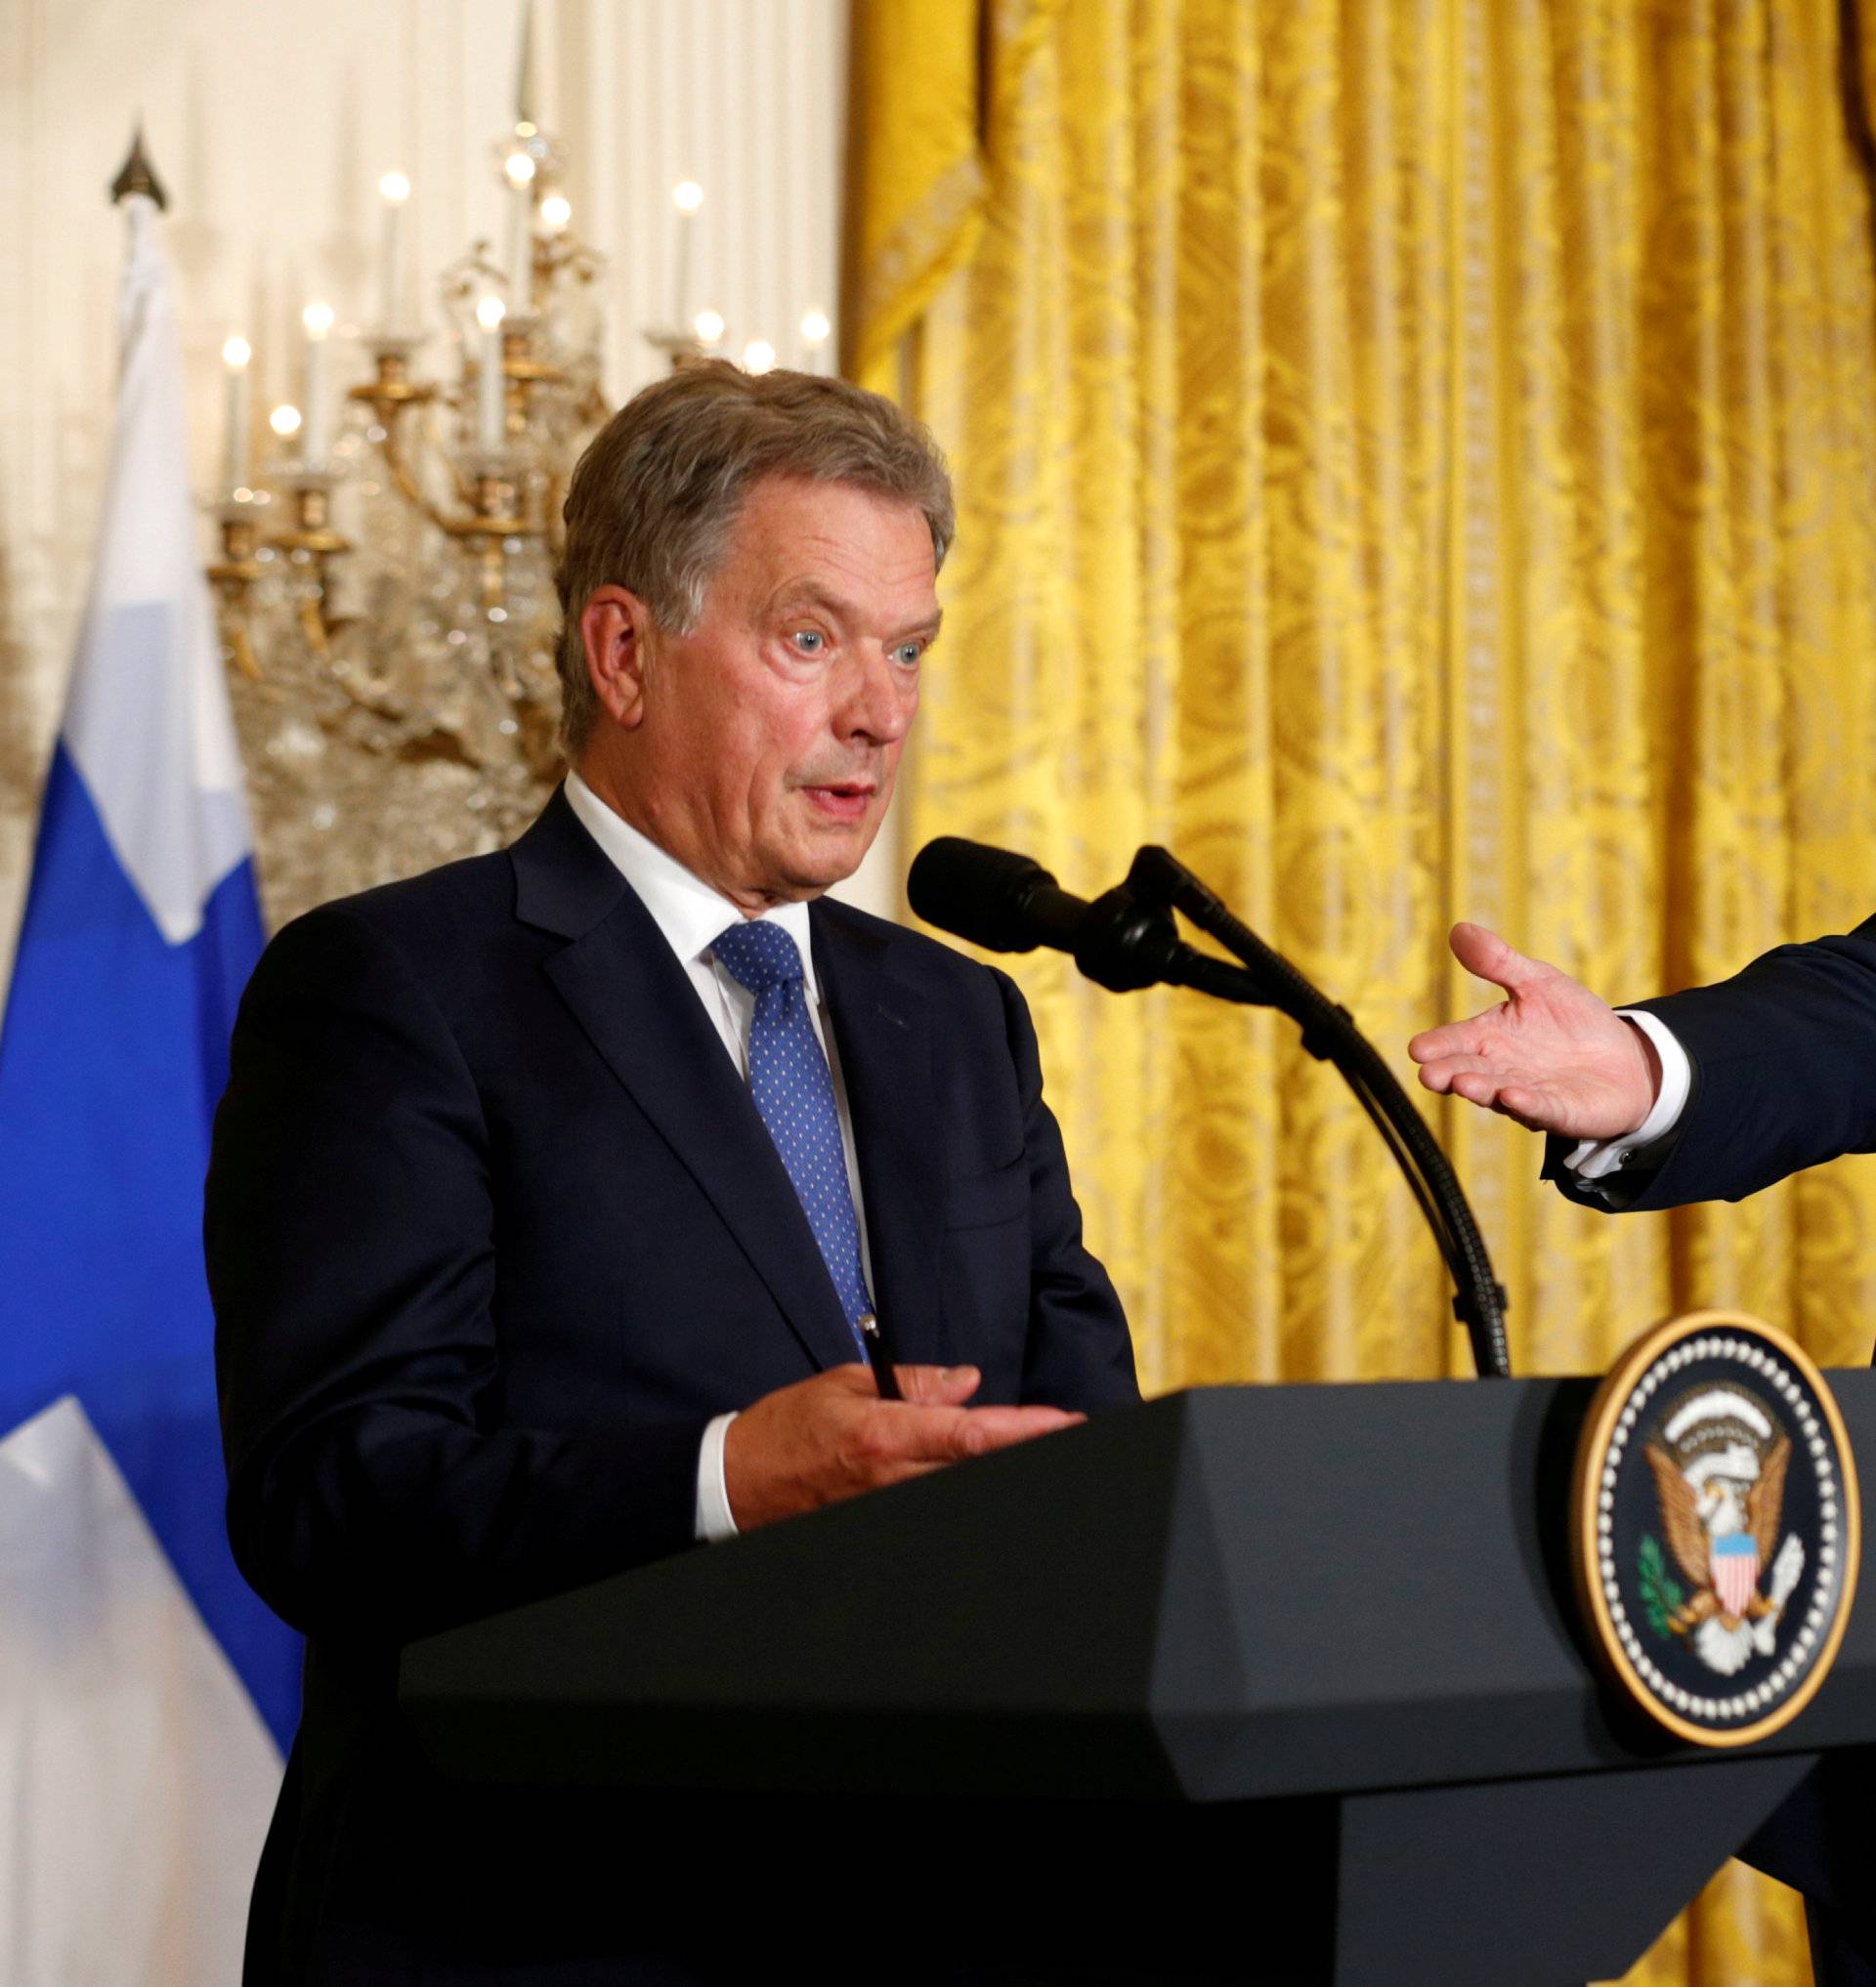 FILE PHOTO: U.S. President Trump holds a joint news conference with Finnish President Niinisto at the White House in Washington